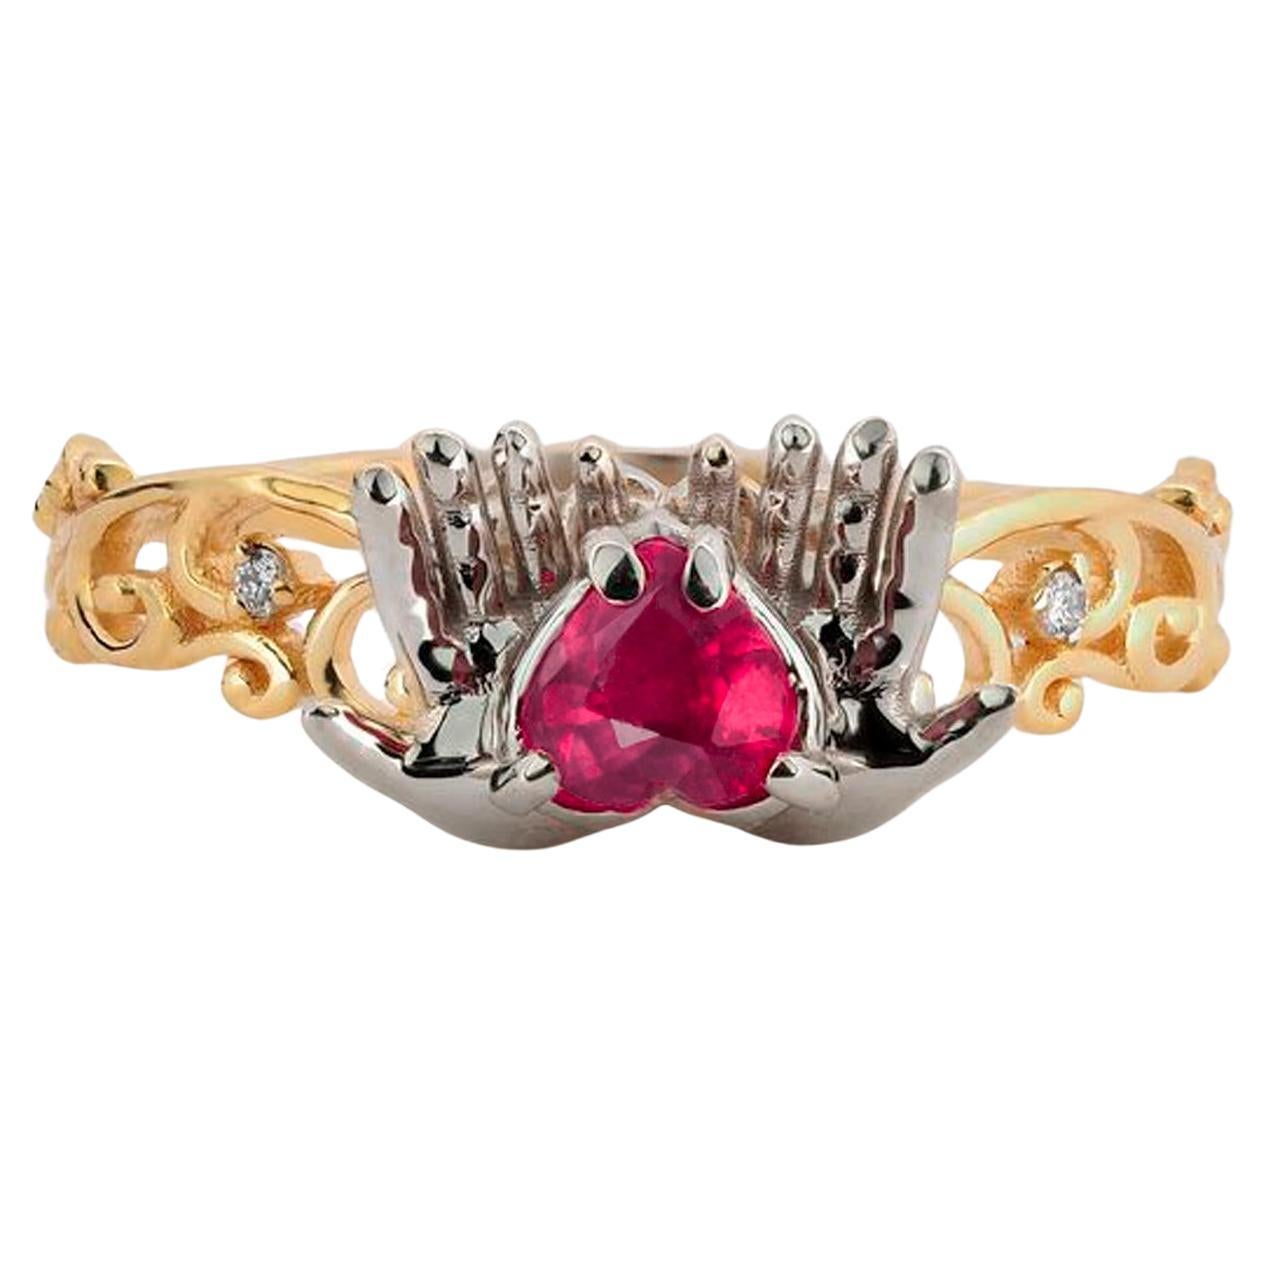 For Sale:  Heart ruby ring in 14 karat gold. July birthstone ruby ring